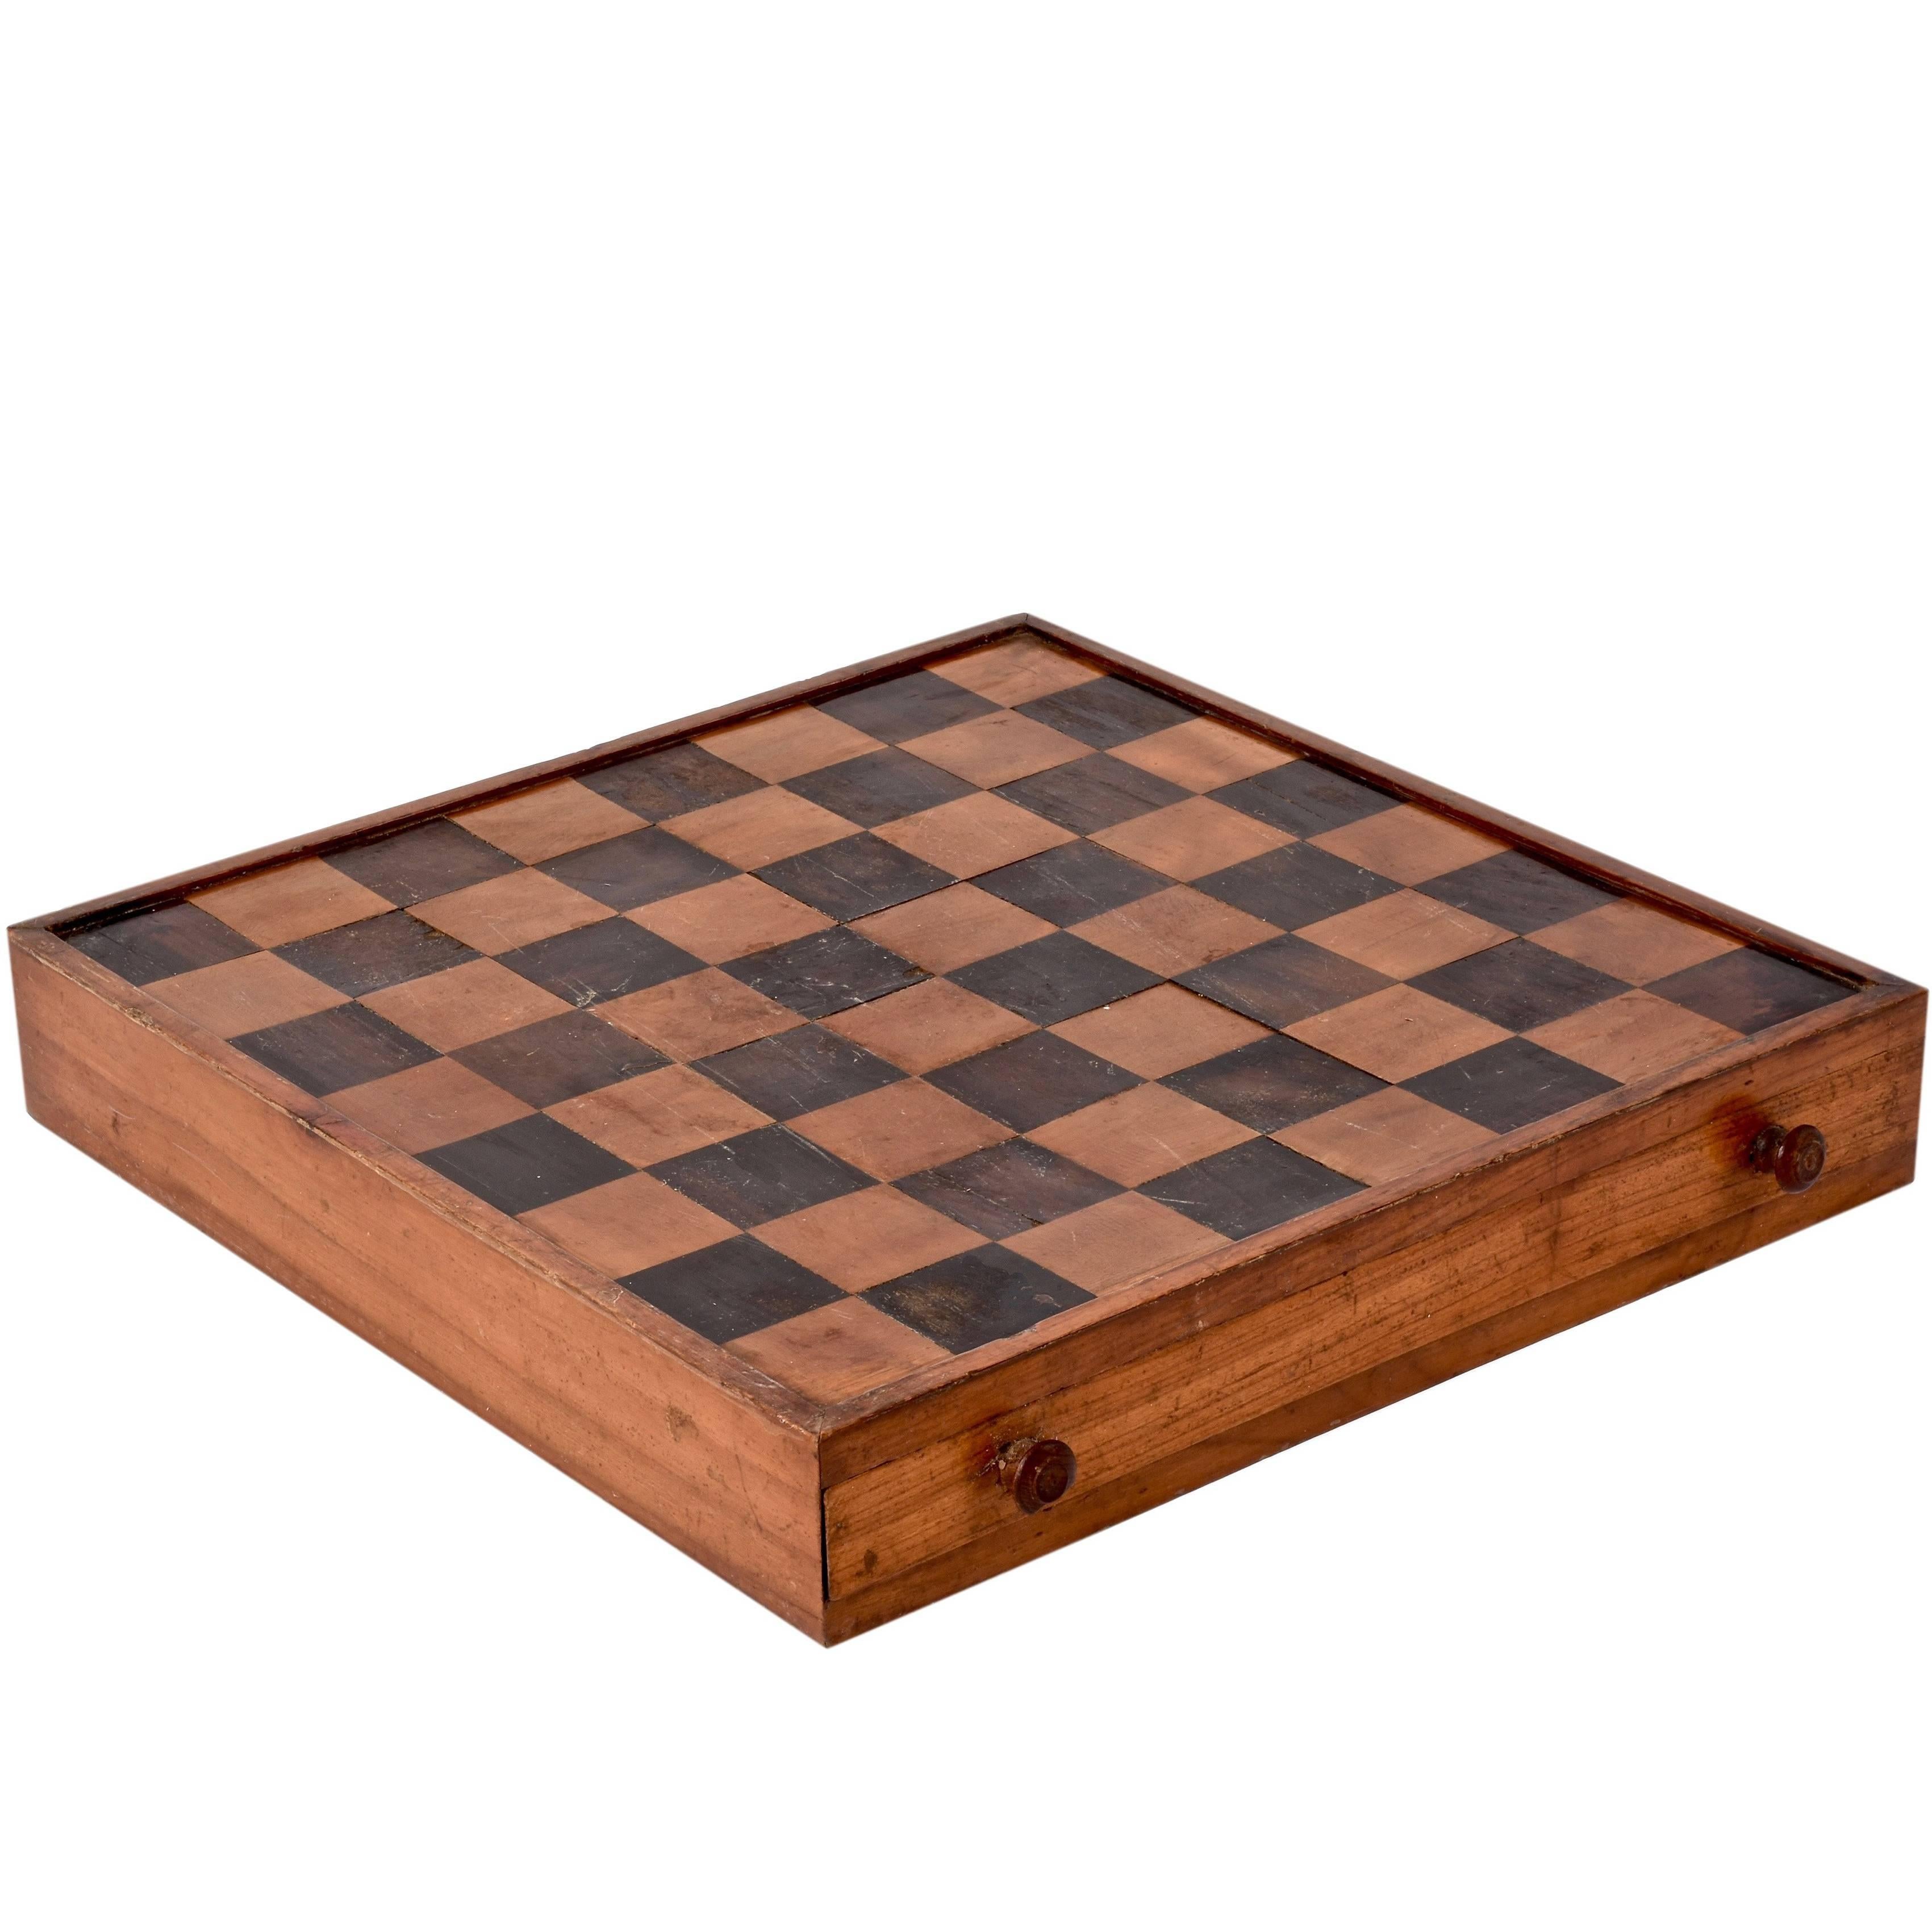 Antique Chessboard Inlaid Inlay Chess or Checker Game 19th Century Checkerboard